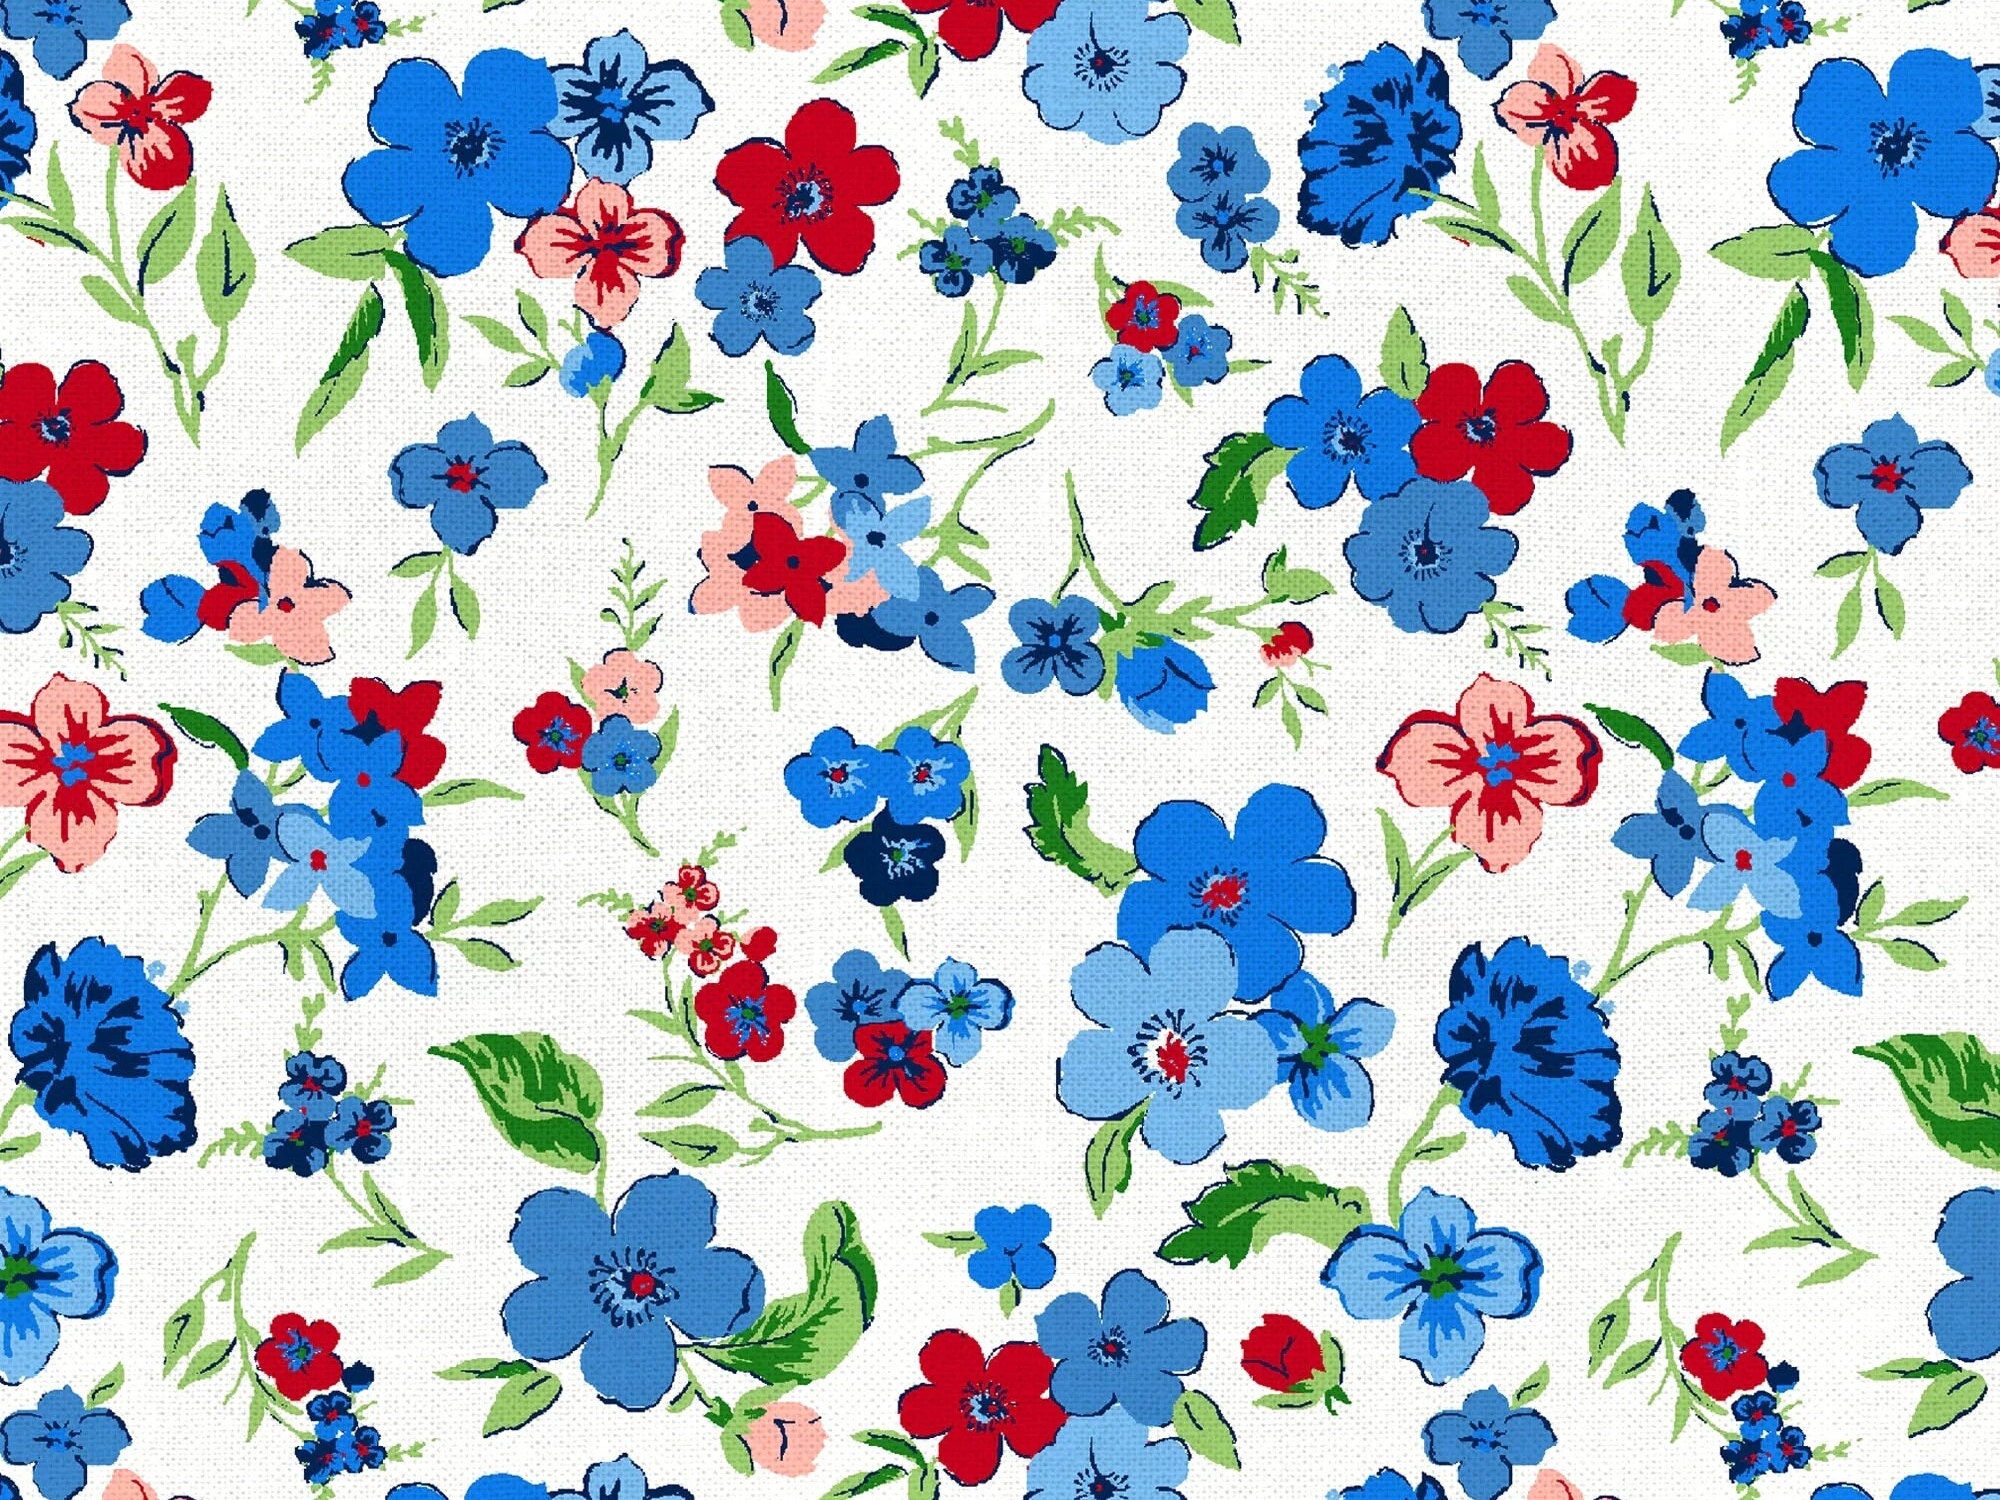 Spring mini Ditsy Floral Fabric 100% Cotton High quality Half Metre  increments